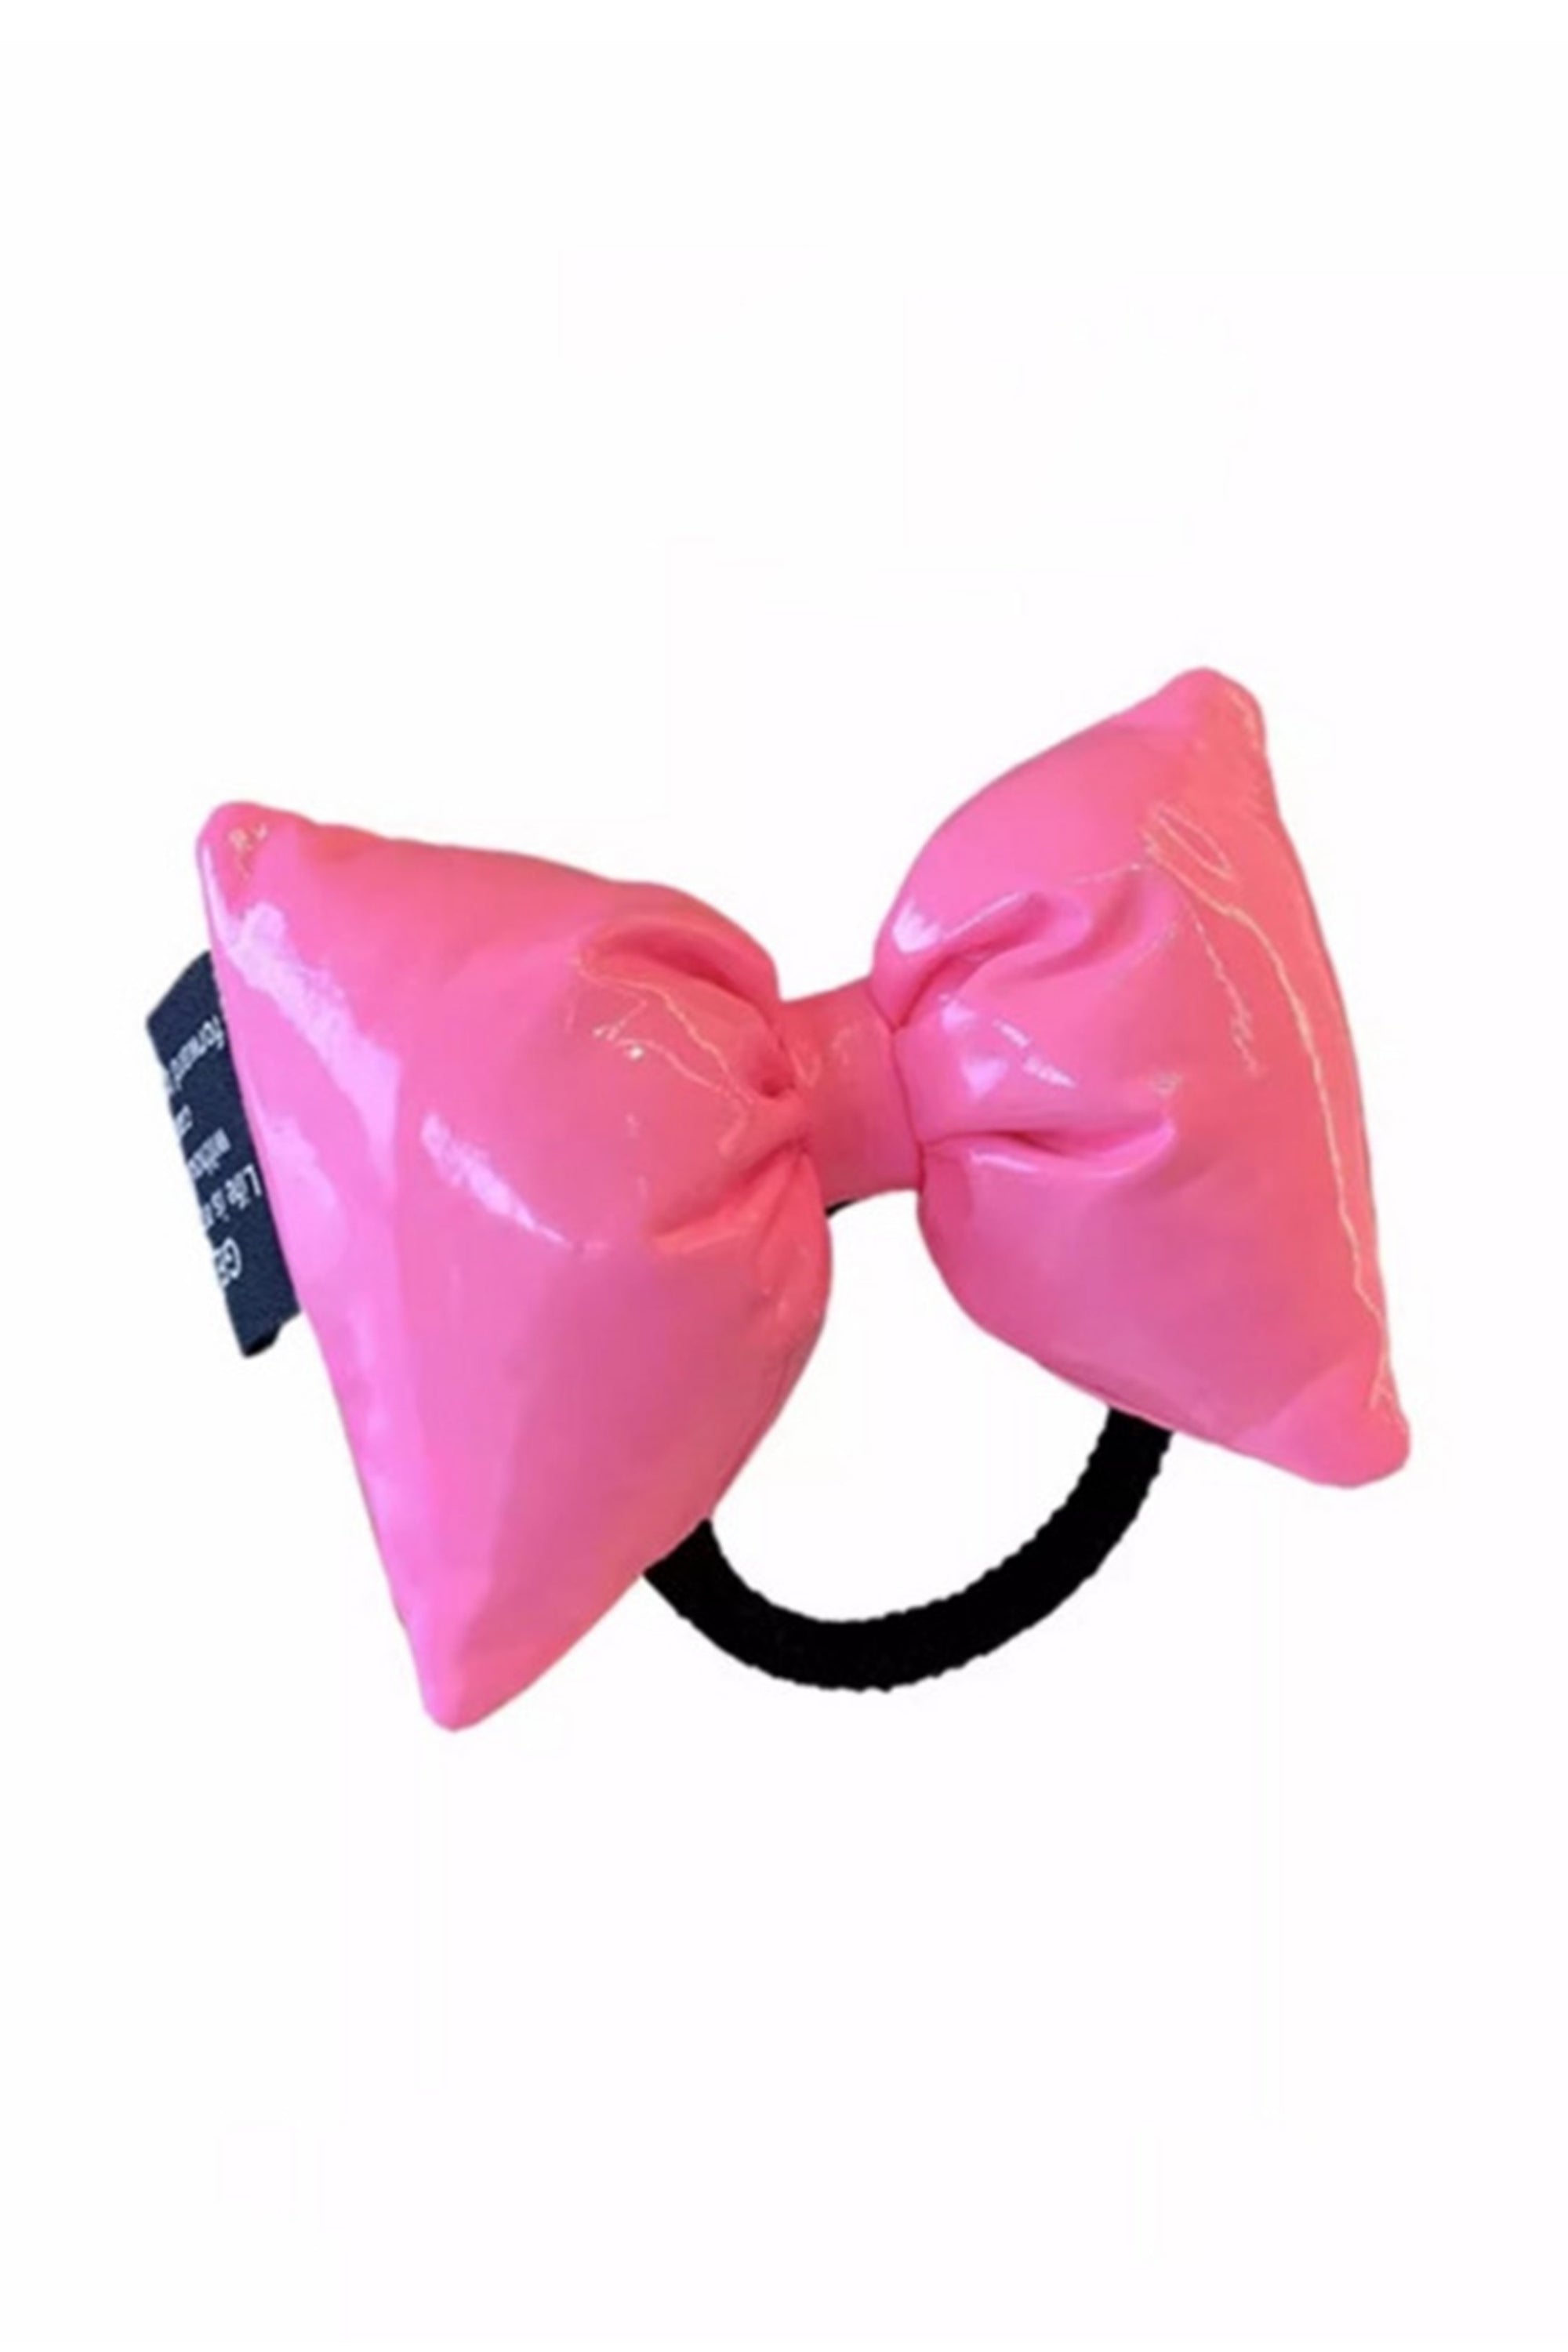 Girlie Pink Bow Pony Tail Holder